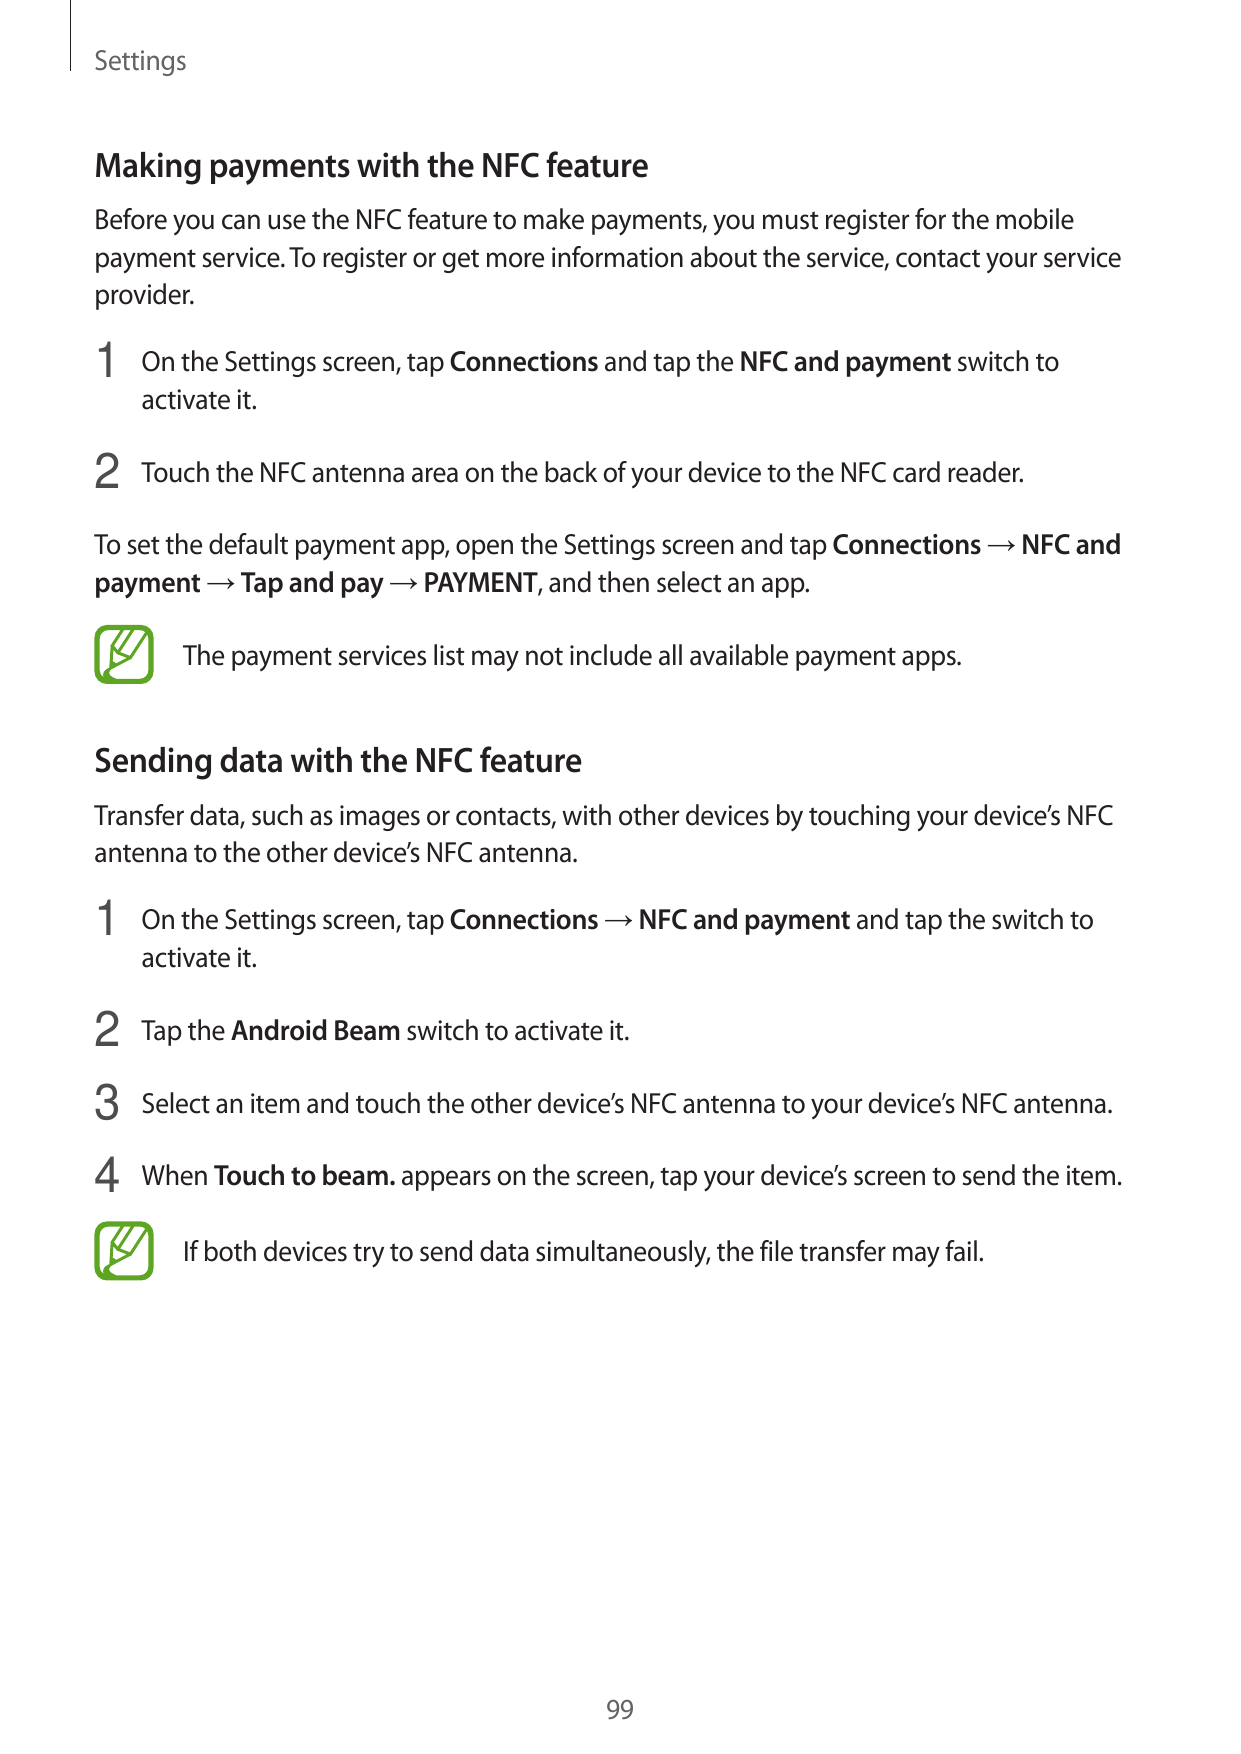 SettingsMaking payments with the NFC featureBefore you can use the NFC feature to make payments, you must register for the mobil